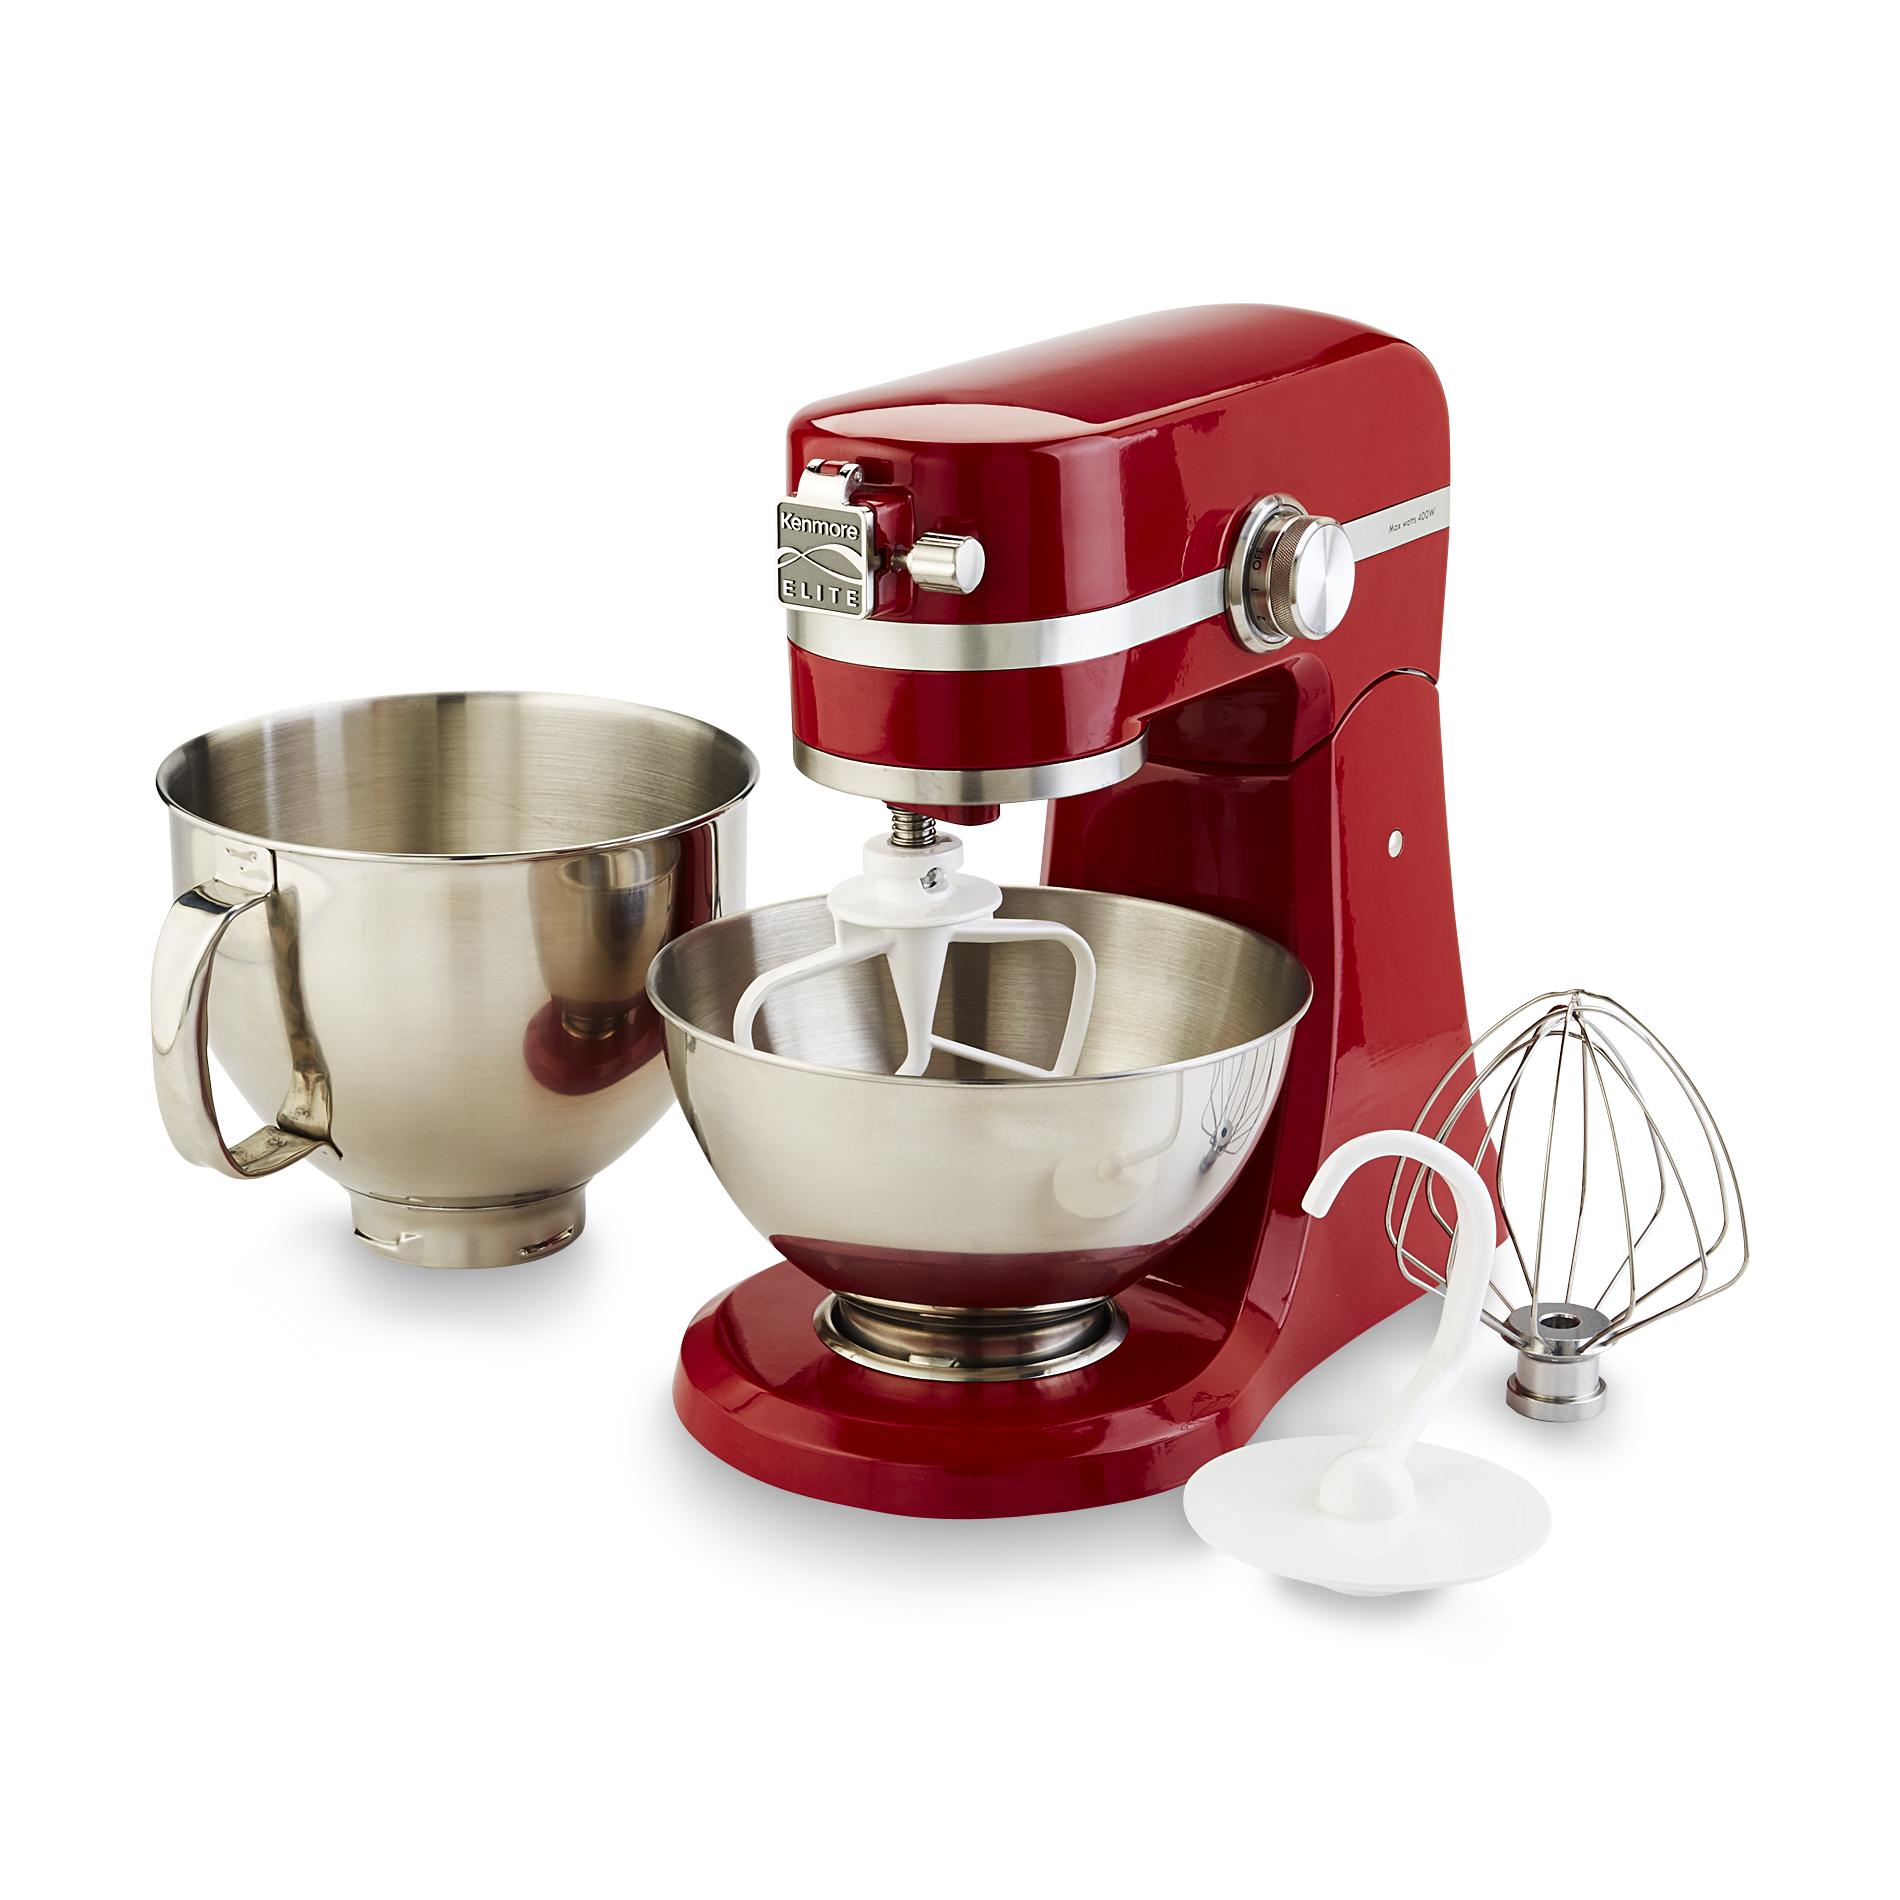 Kenmore Elite Ovation Tilt Head Stand Mixer - household items - by owner -  housewares sale - craigslist